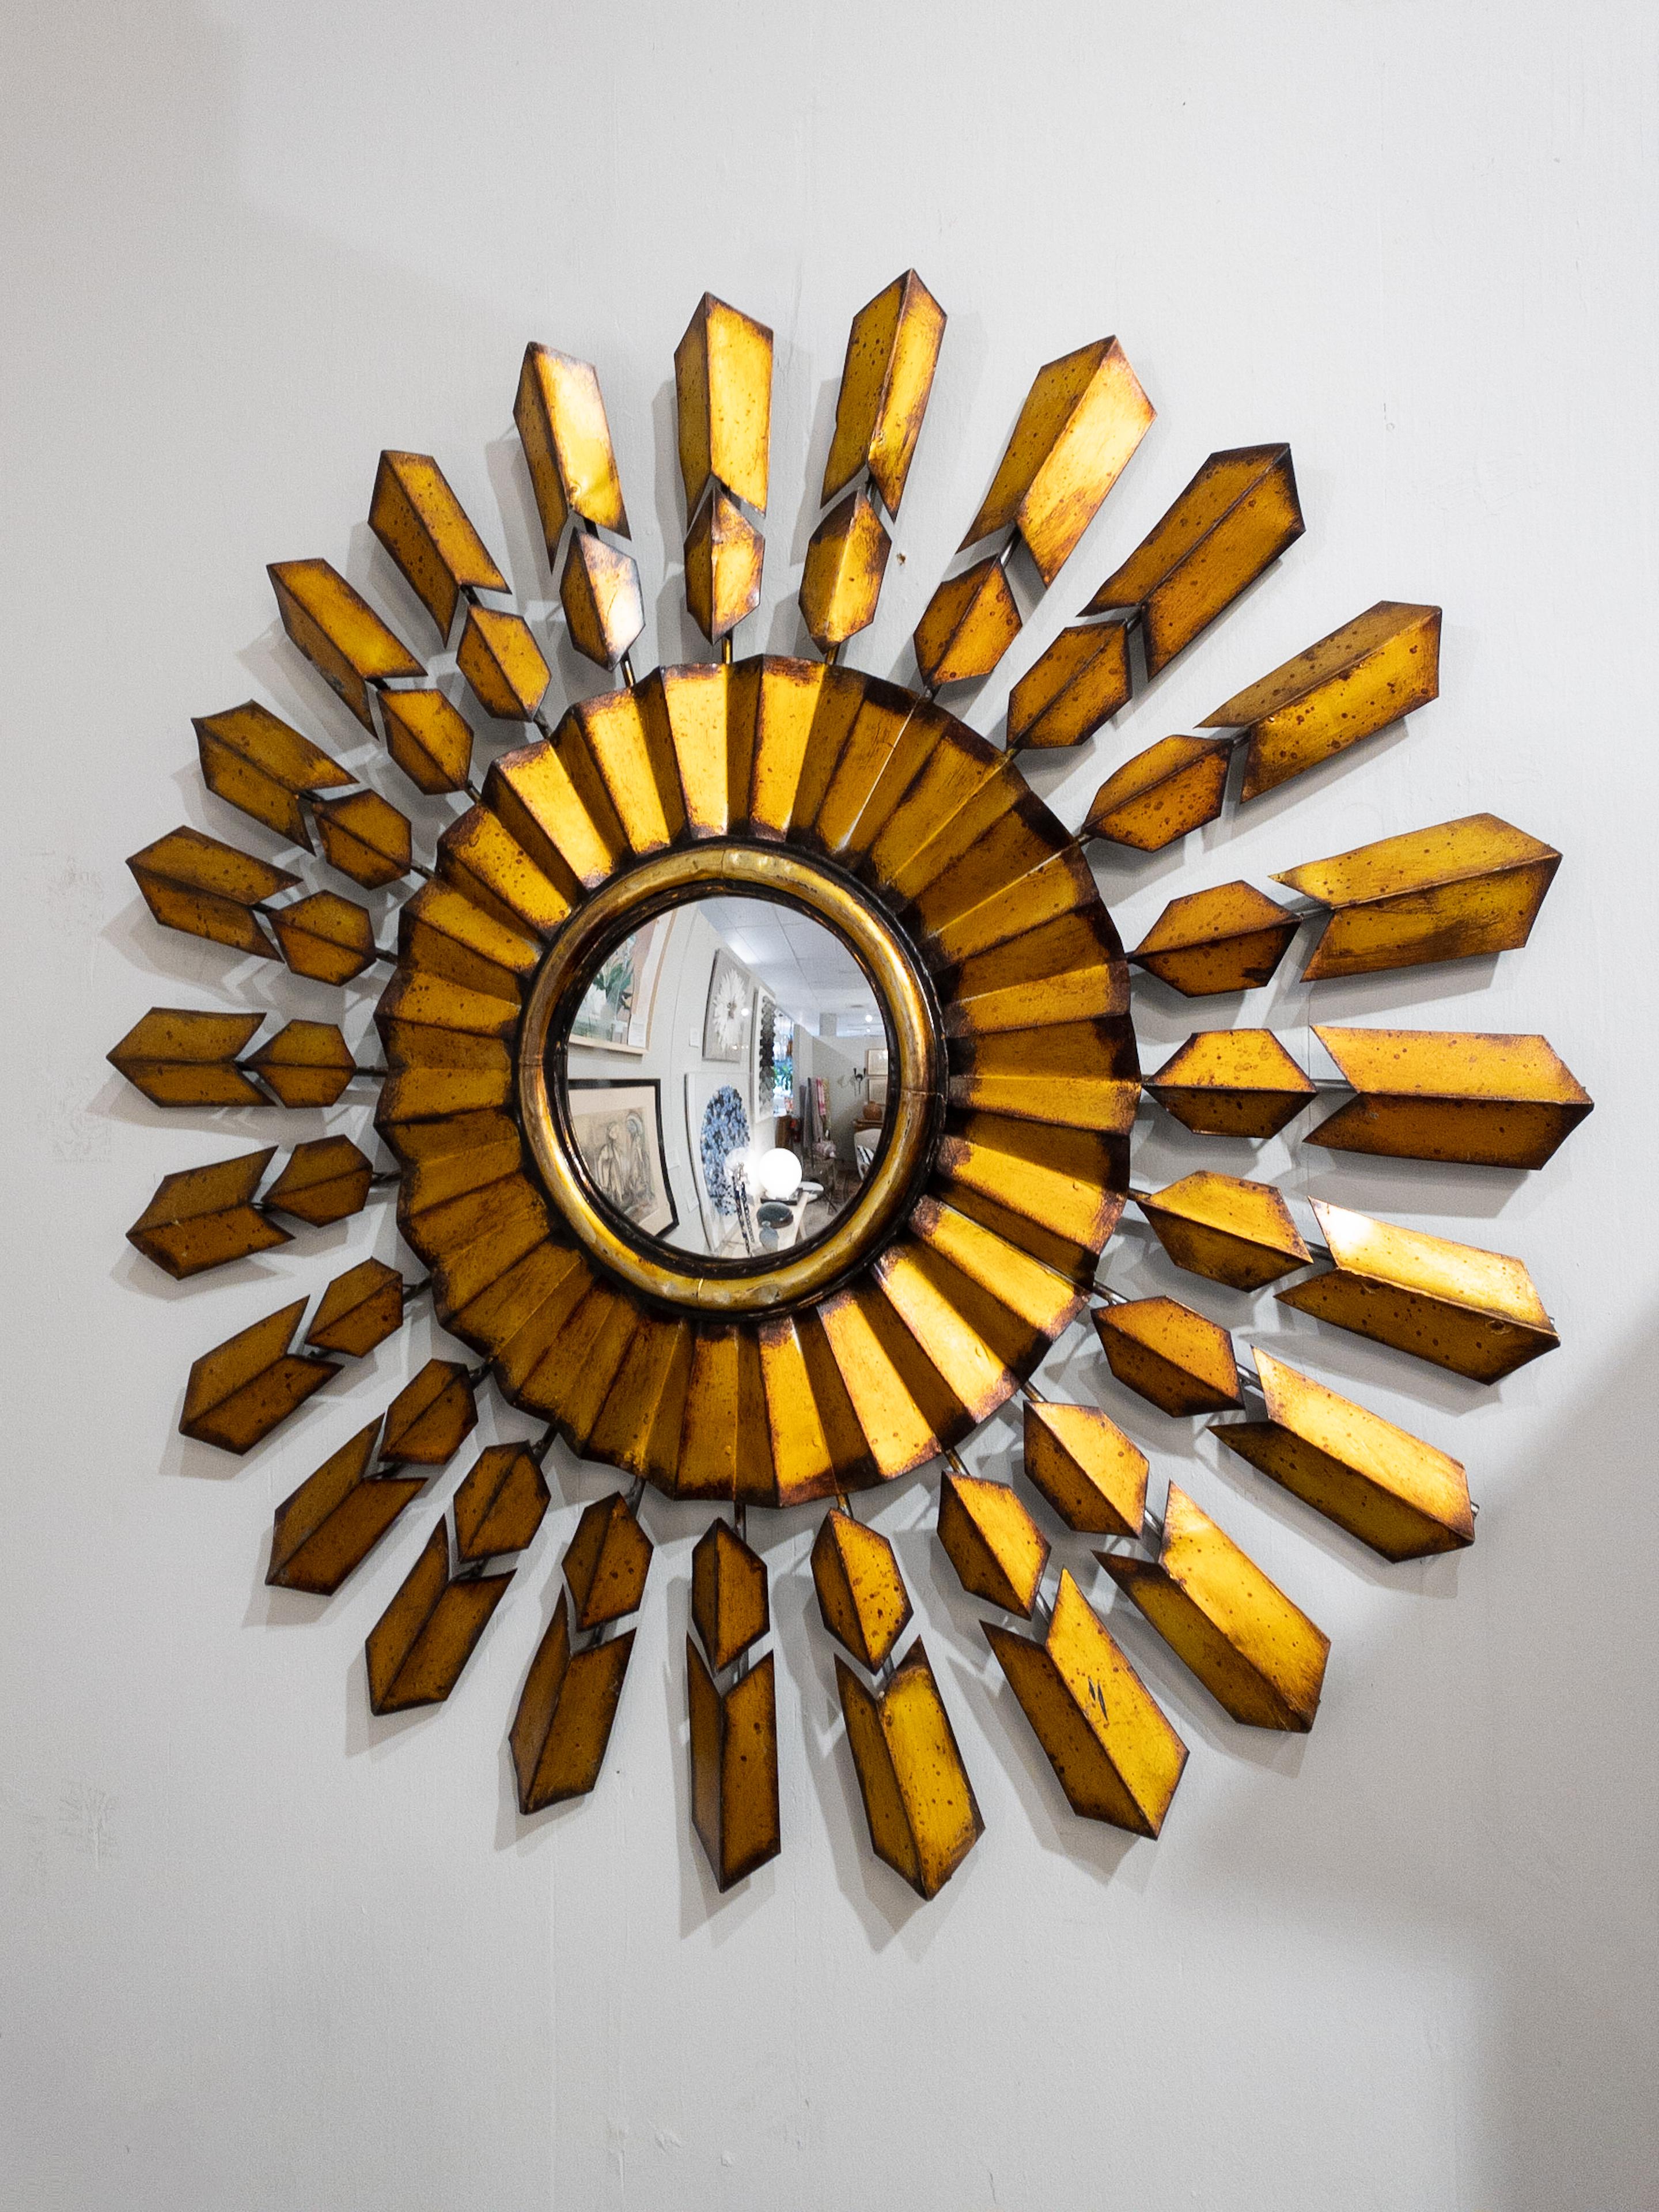 The Mid Century Modern French Sun Burst Mirror is a stunning and iconic piece of decor that captures the essence of the mid-century design era. Crafted from gilded metal, its sunburst shape radiates with a sense of energy and optimism, emblematic of